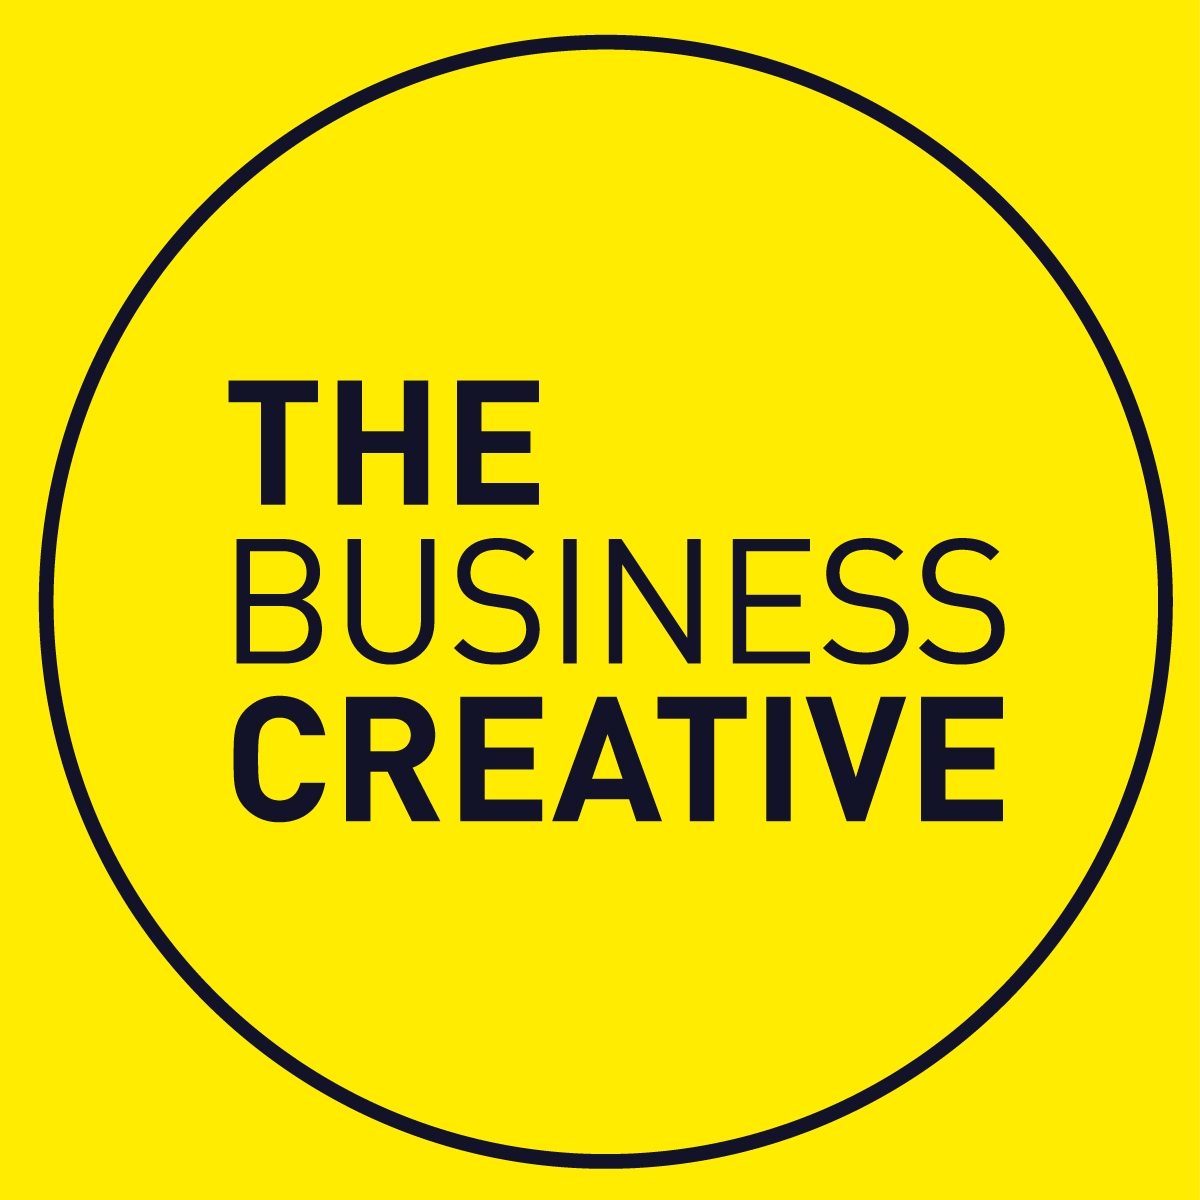 THE BUSINESS CREATIVE